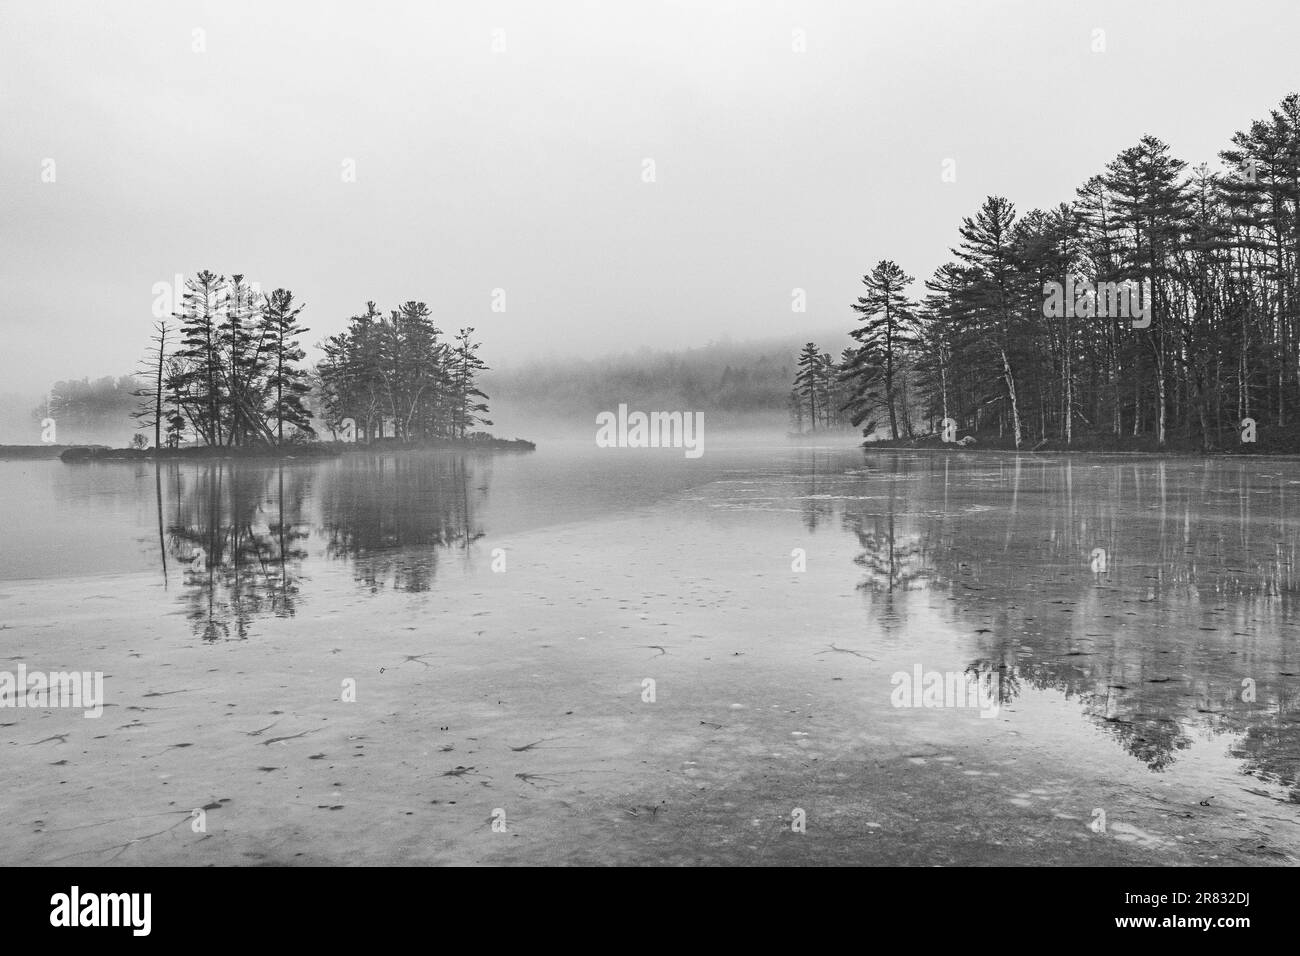 Harvard Pond in Petersham, MA on a foggy day Stock Photo